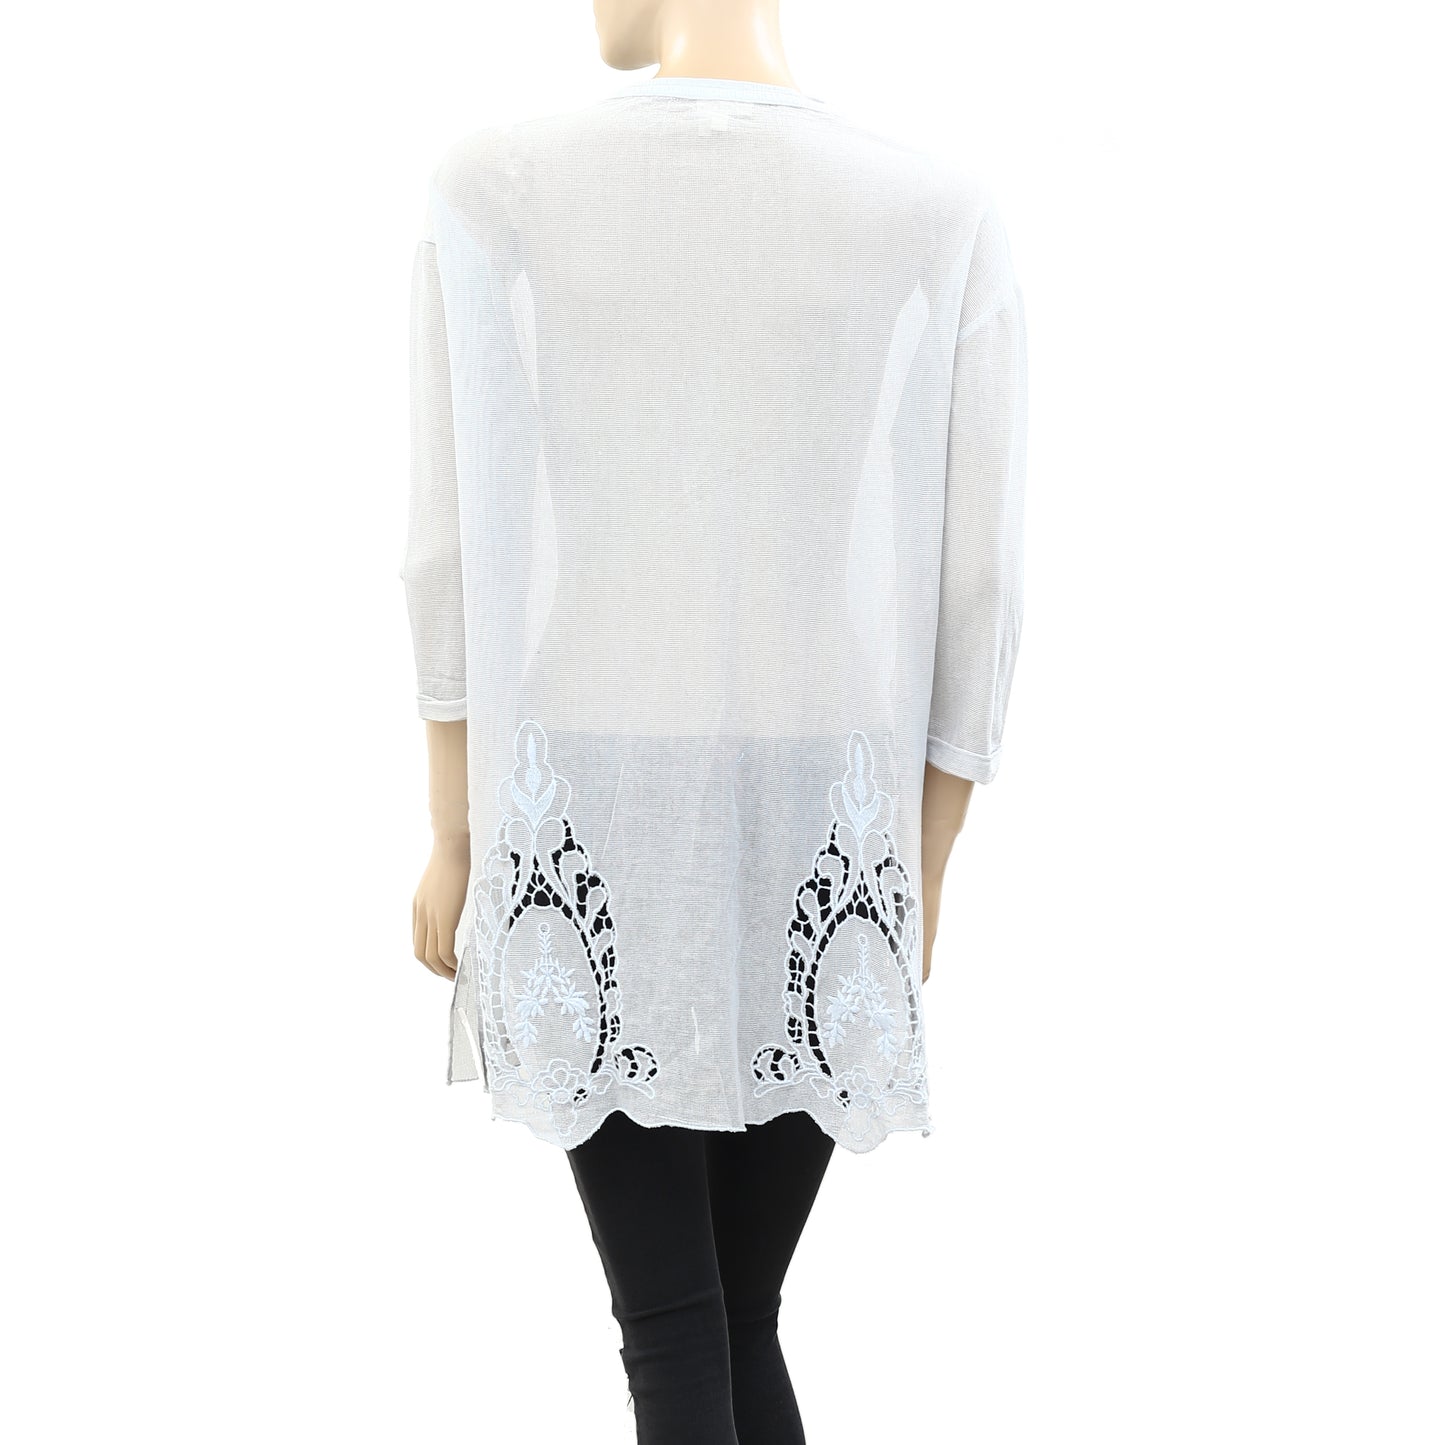 Meadow Rue Anthropologie Mesh Embroidered Ciel Tunic Top S